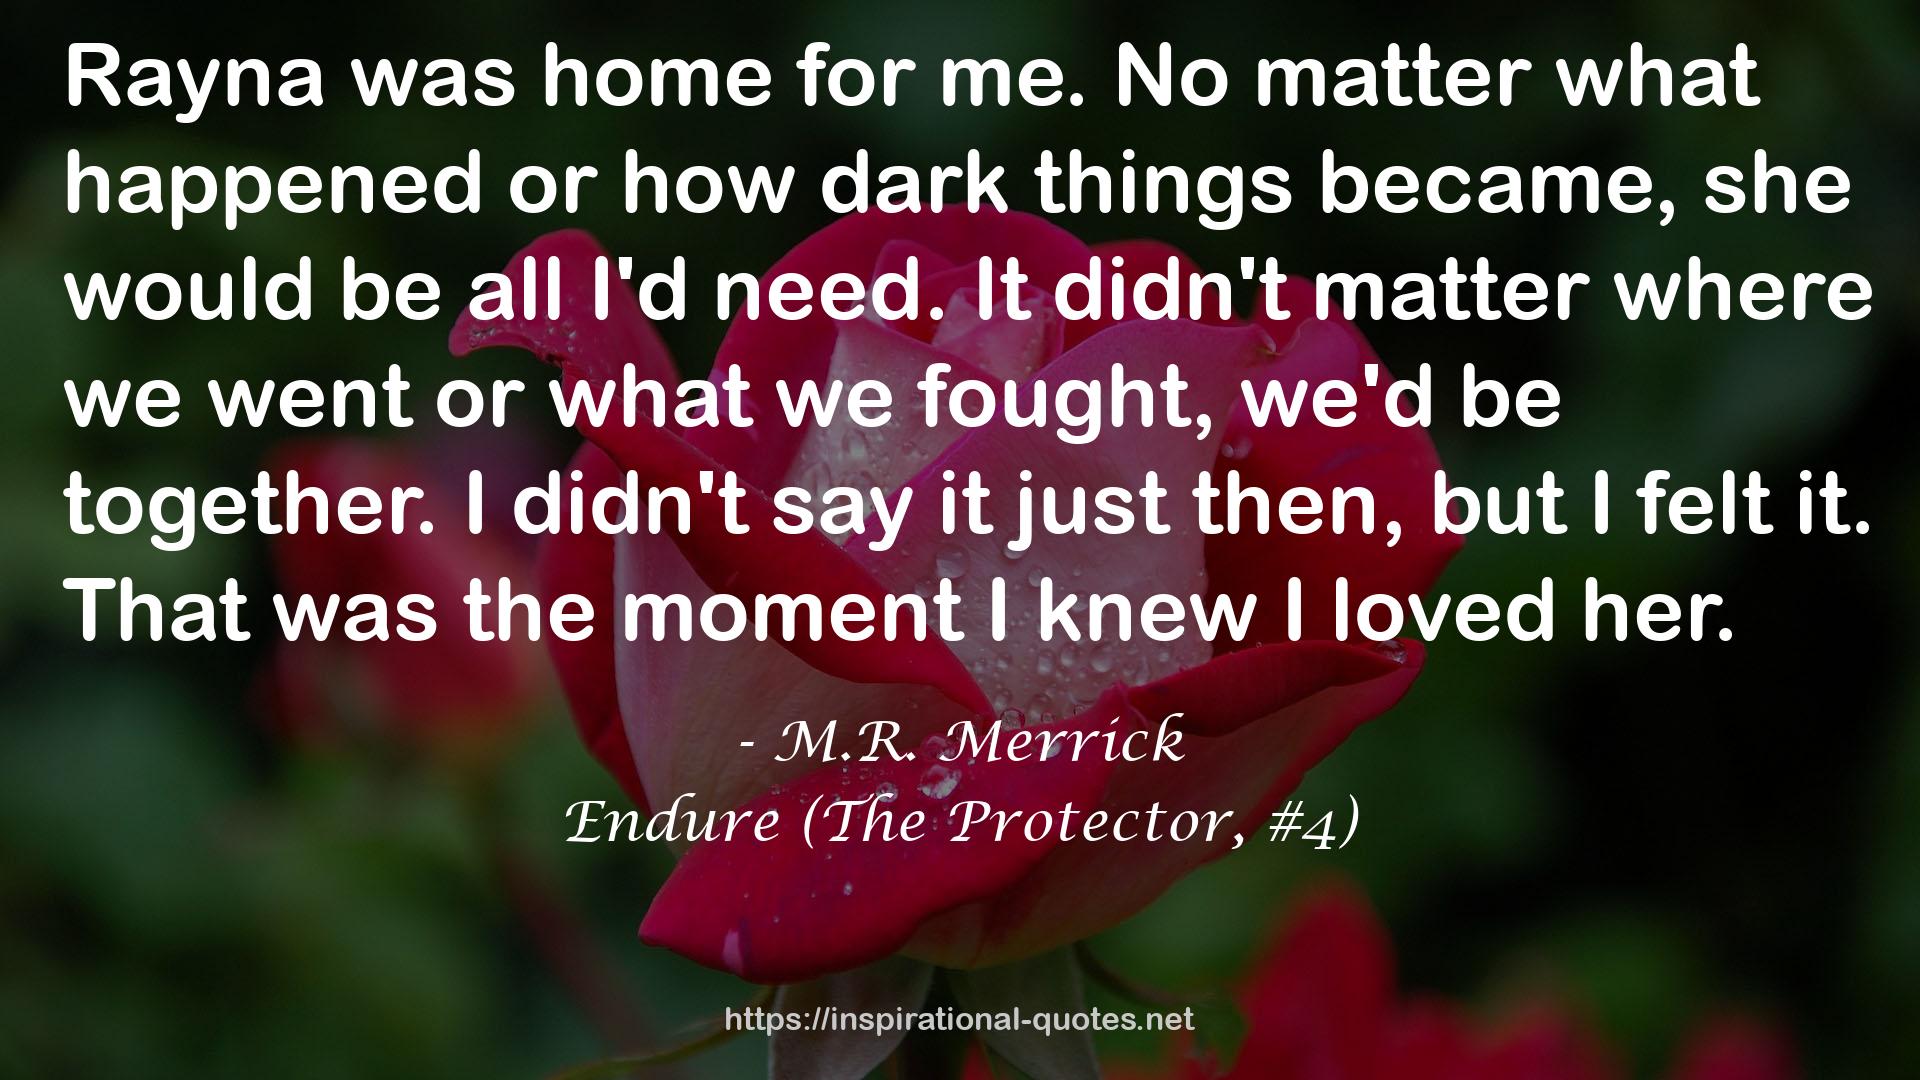 Endure (The Protector, #4) QUOTES